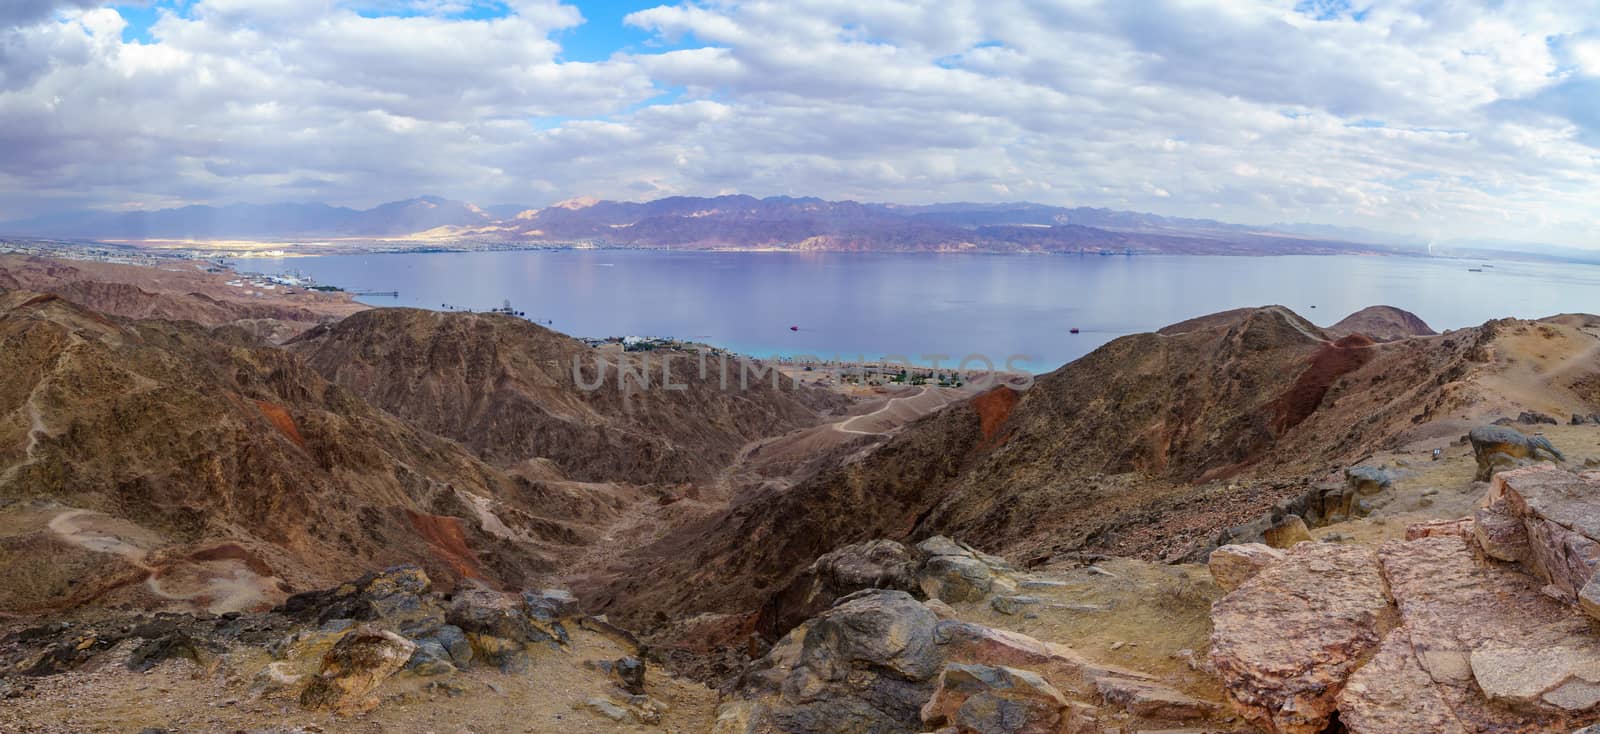 Panoramic view of Mount Tzfahot and the gulf of Aqaba. Eilat Mountains, southern Israel and Jordan